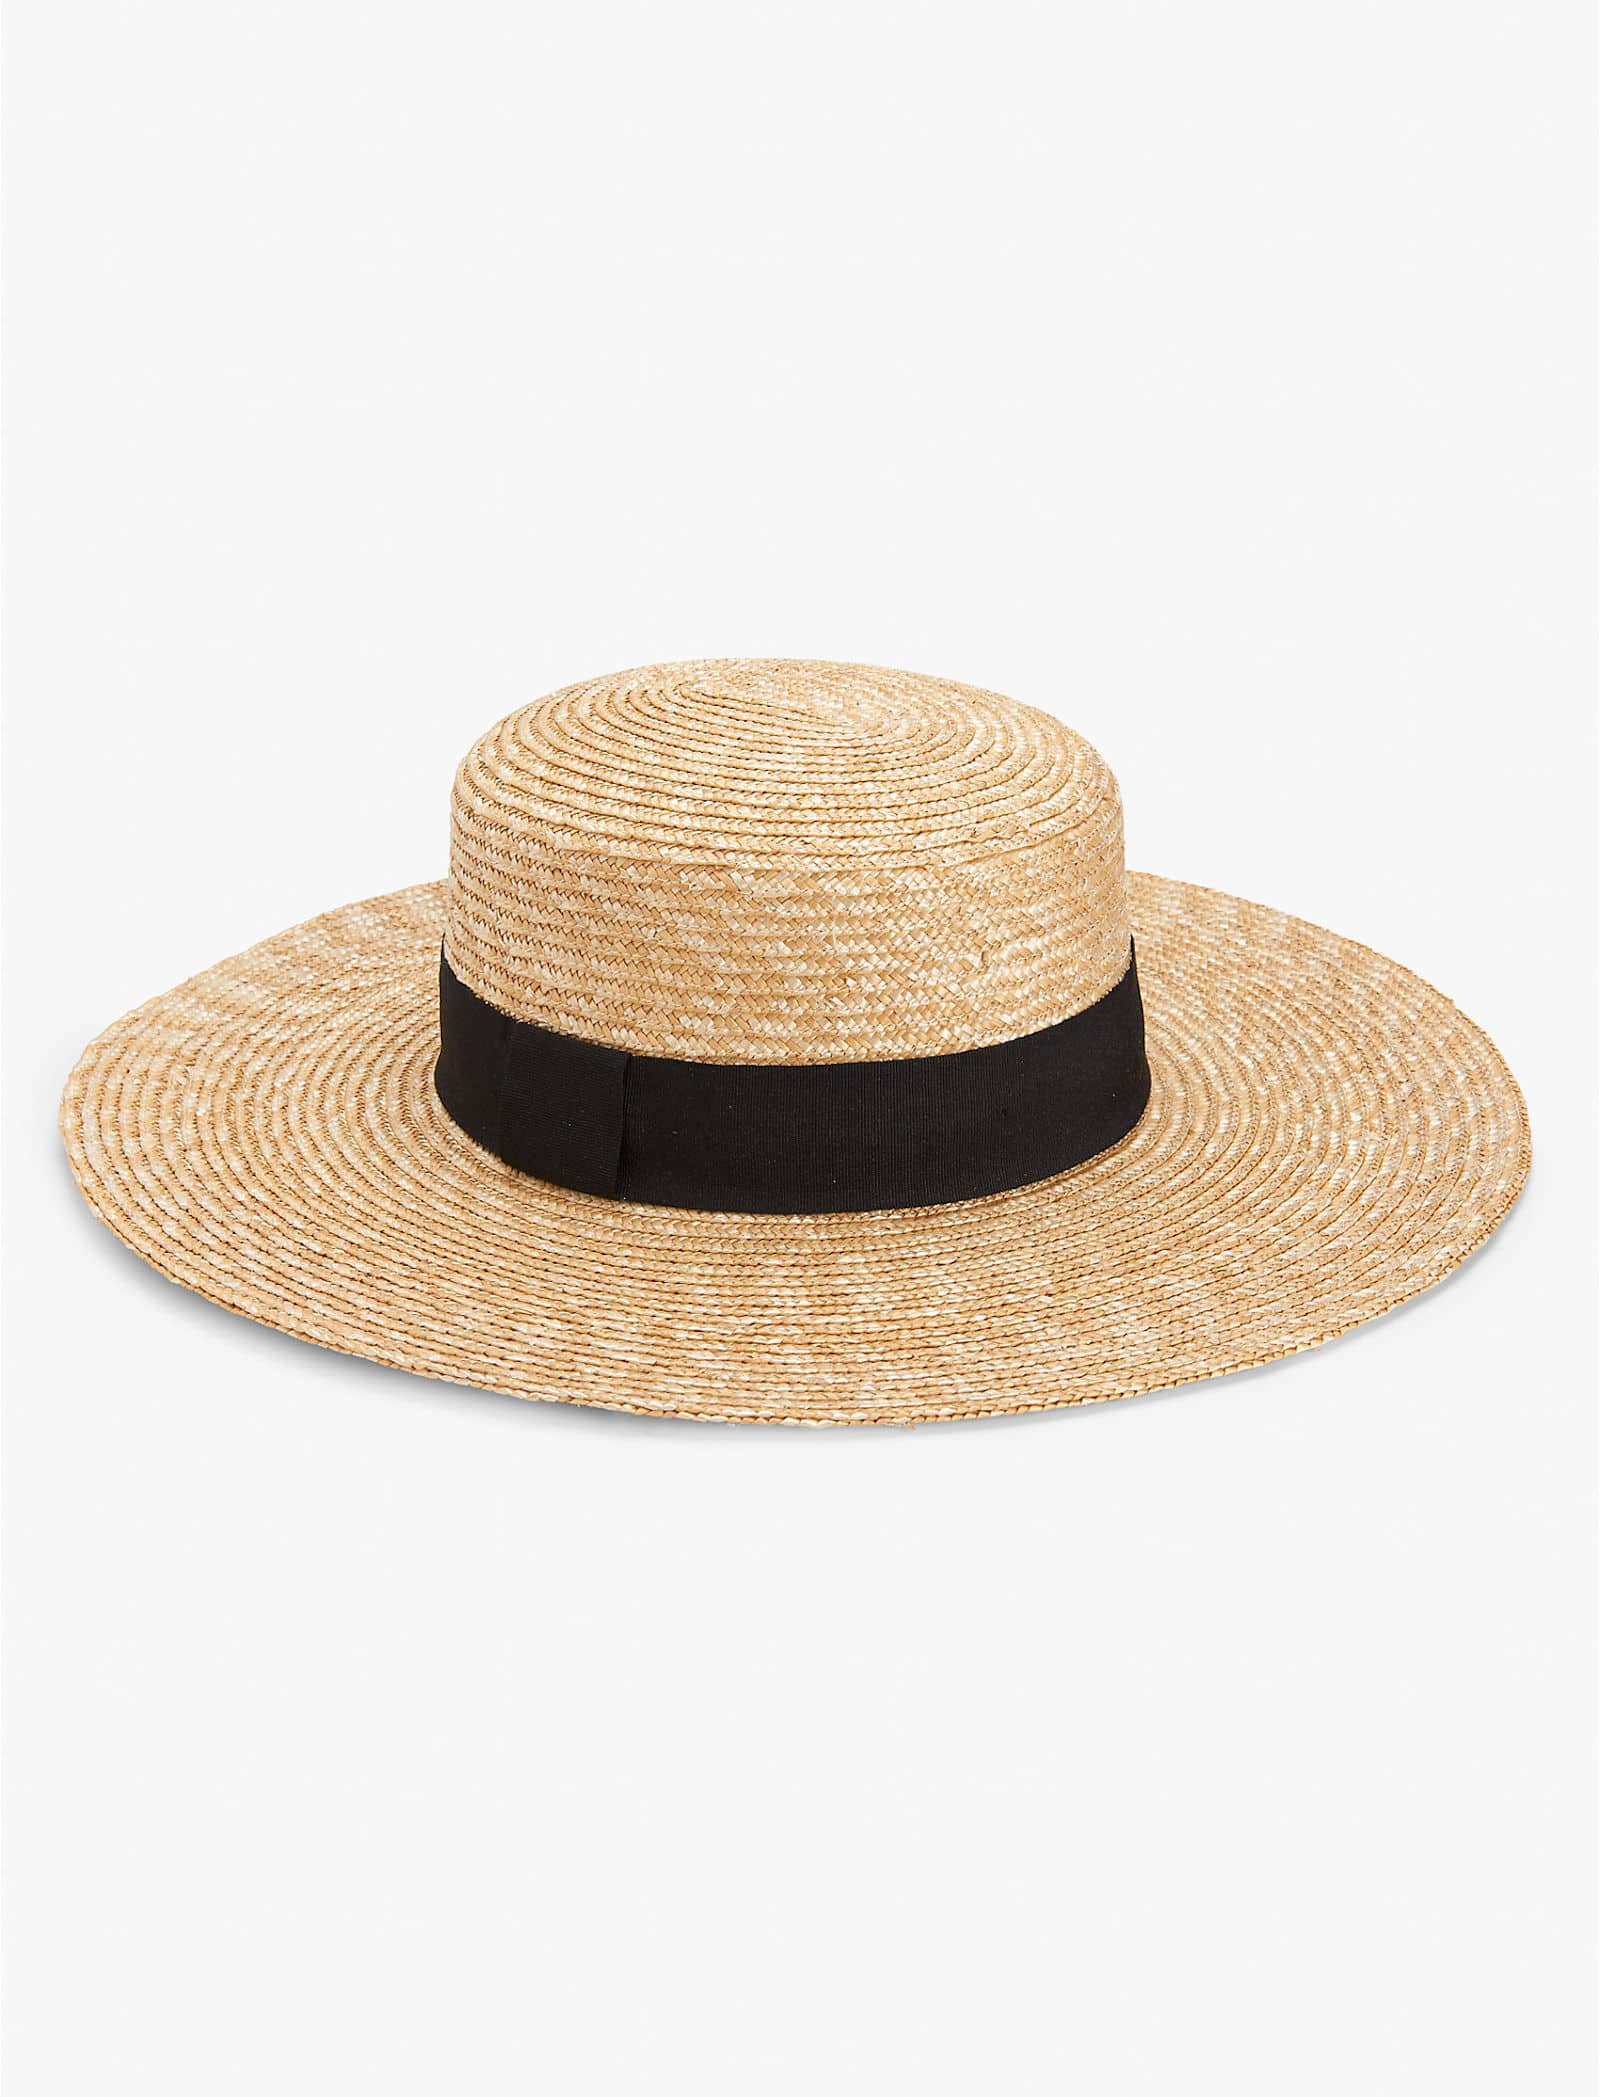 lucky brand structured boater hat